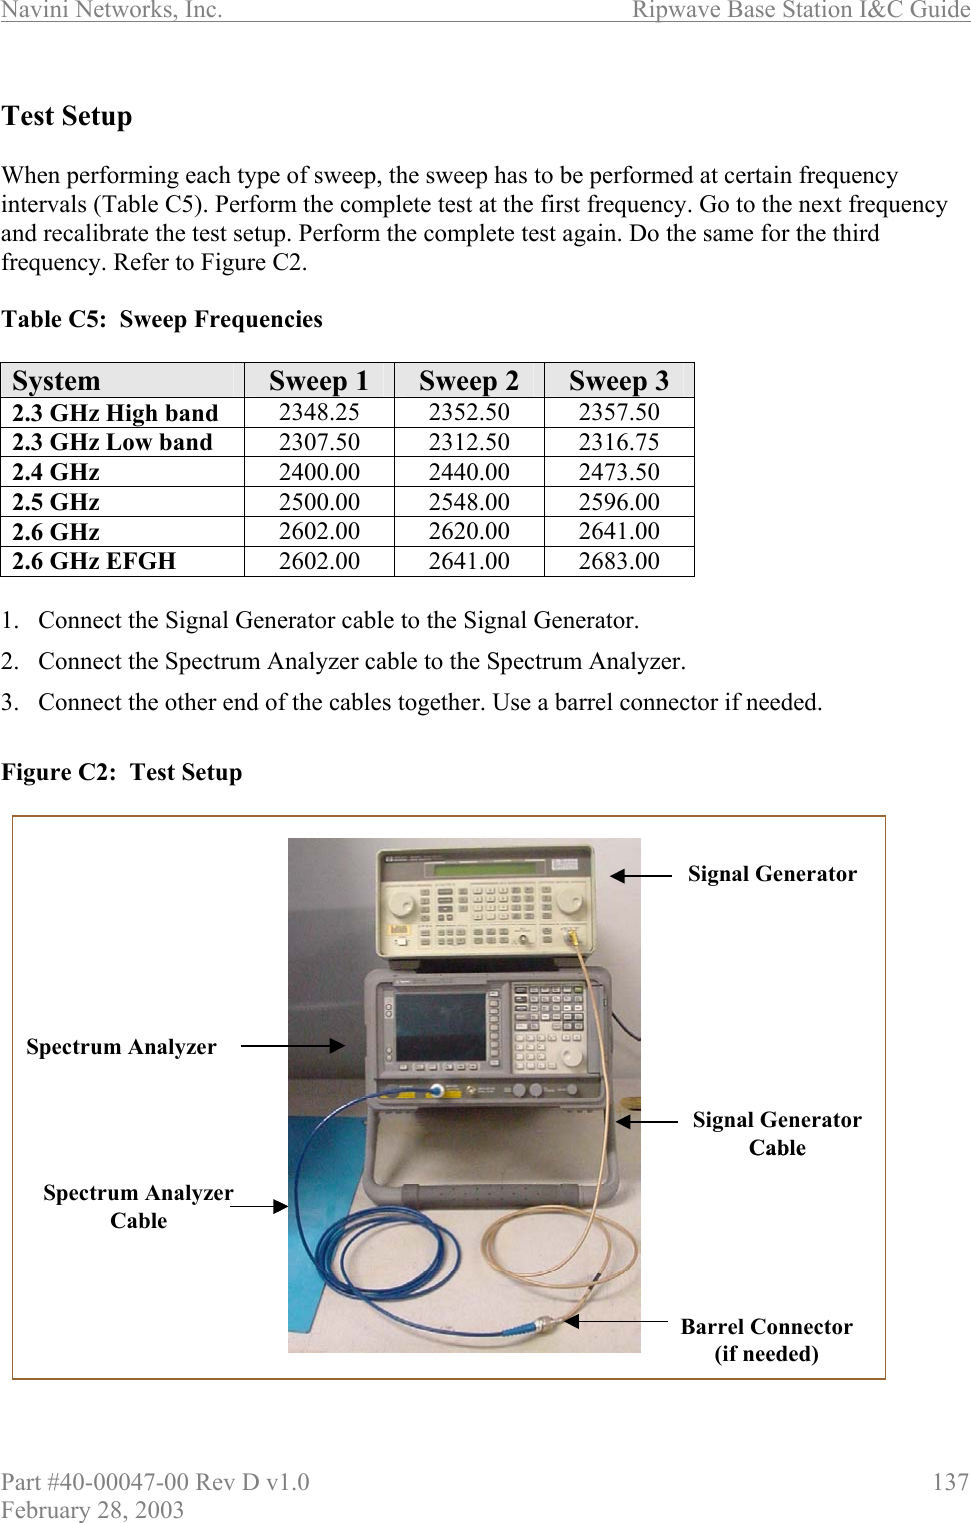 Navini Networks, Inc.                          Ripwave Base Station I&amp;C Guide Part #40-00047-00 Rev D v1.0                     137 February 28, 2003  Test Setup  When performing each type of sweep, the sweep has to be performed at certain frequency intervals (Table C5). Perform the complete test at the first frequency. Go to the next frequency and recalibrate the test setup. Perform the complete test again. Do the same for the third frequency. Refer to Figure C2.  Table C5:  Sweep Frequencies  System  Sweep 1  Sweep 2  Sweep 3 2.3 GHz High band  2348.25 2352.50 2357.50 2.3 GHz Low band  2307.50 2312.50 2316.75 2.4 GHz  2400.00 2440.00 2473.50 2.5 GHz  2500.00 2548.00 2596.00 2.6 GHz  2602.00 2620.00 2641.00 2.6 GHz EFGH  2602.00 2641.00 2683.00  1.  Connect the Signal Generator cable to the Signal Generator. 2.  Connect the Spectrum Analyzer cable to the Spectrum Analyzer.  3.  Connect the other end of the cables together. Use a barrel connector if needed.  Figure C2:  Test Setup                       Spectrum AnalyzerSignal GeneratorBarrel Connector (if needed)Signal Generator CableSpectrum Analyzer CableSpectrum AnalyzerSignal GeneratorBarrel Connector (if needed)Signal Generator CableSpectrum Analyzer Cable